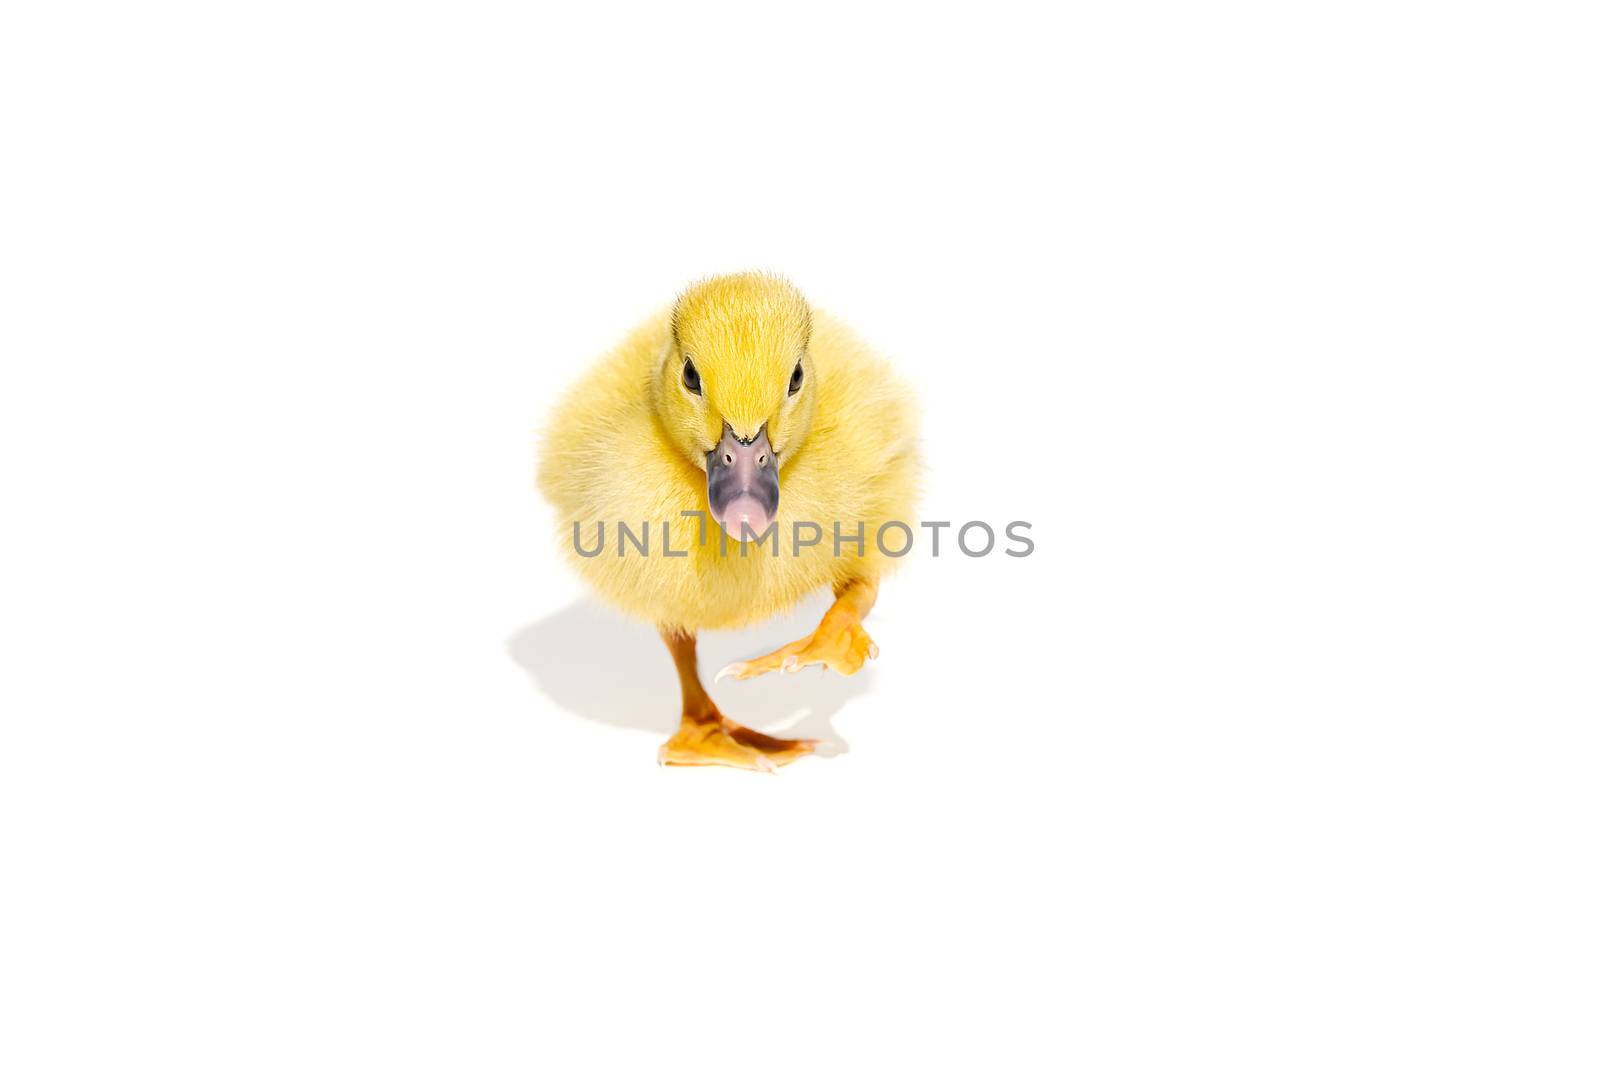 NewBorn little Cute yellow duckling isolated on white. by PhotoTime